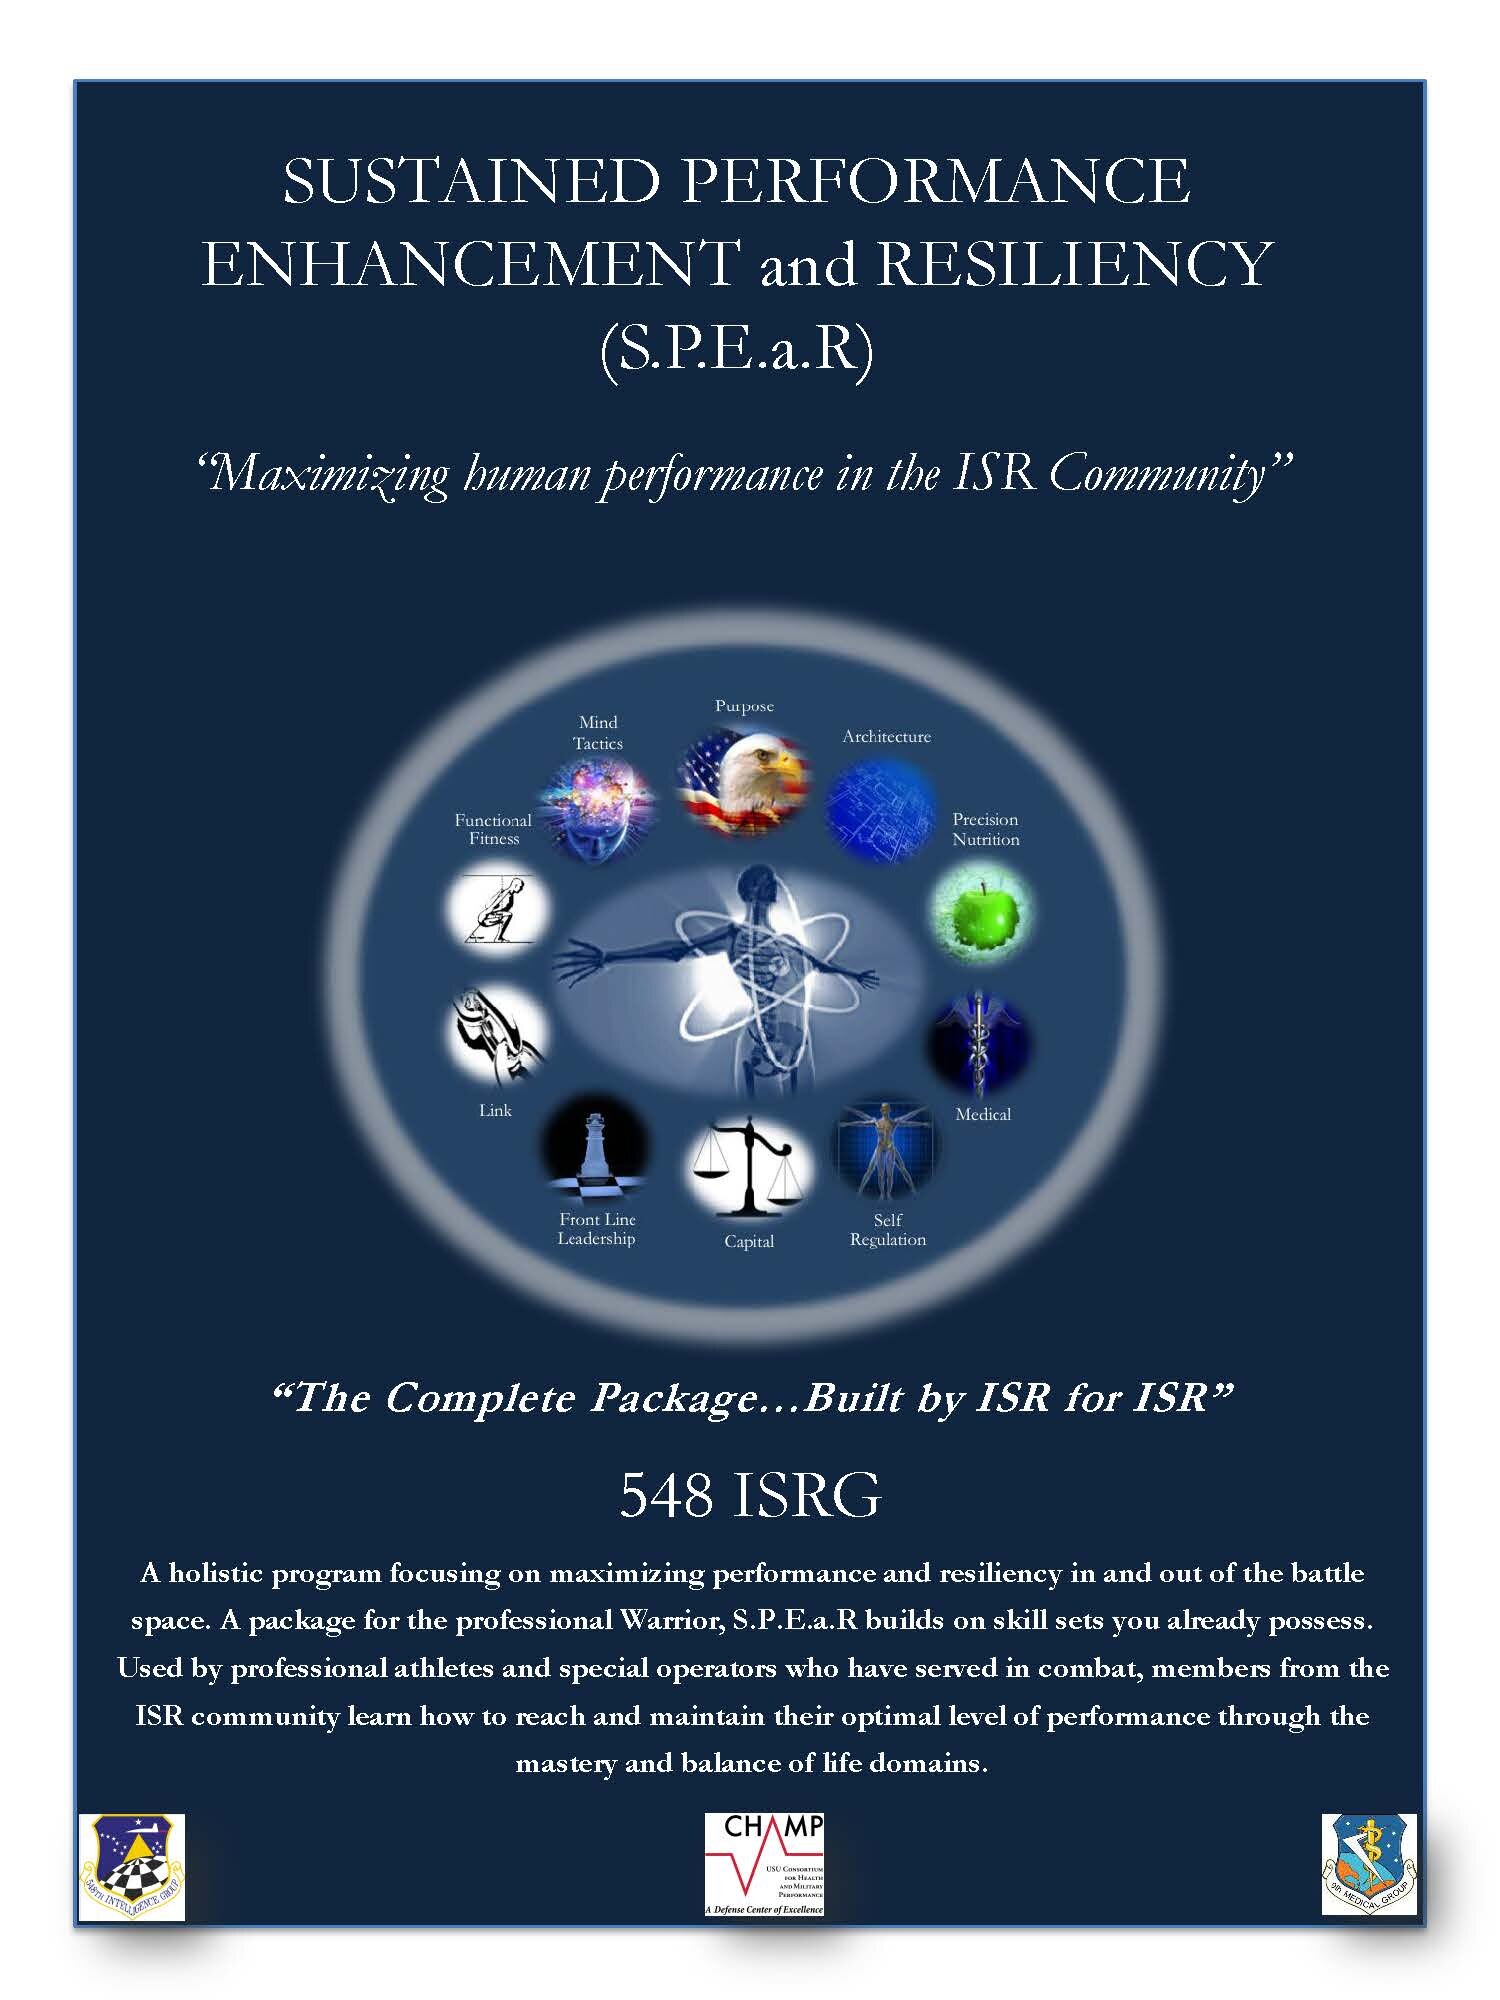 Sustained Performance Enhancement and Resiliency (SPEaR) initiative